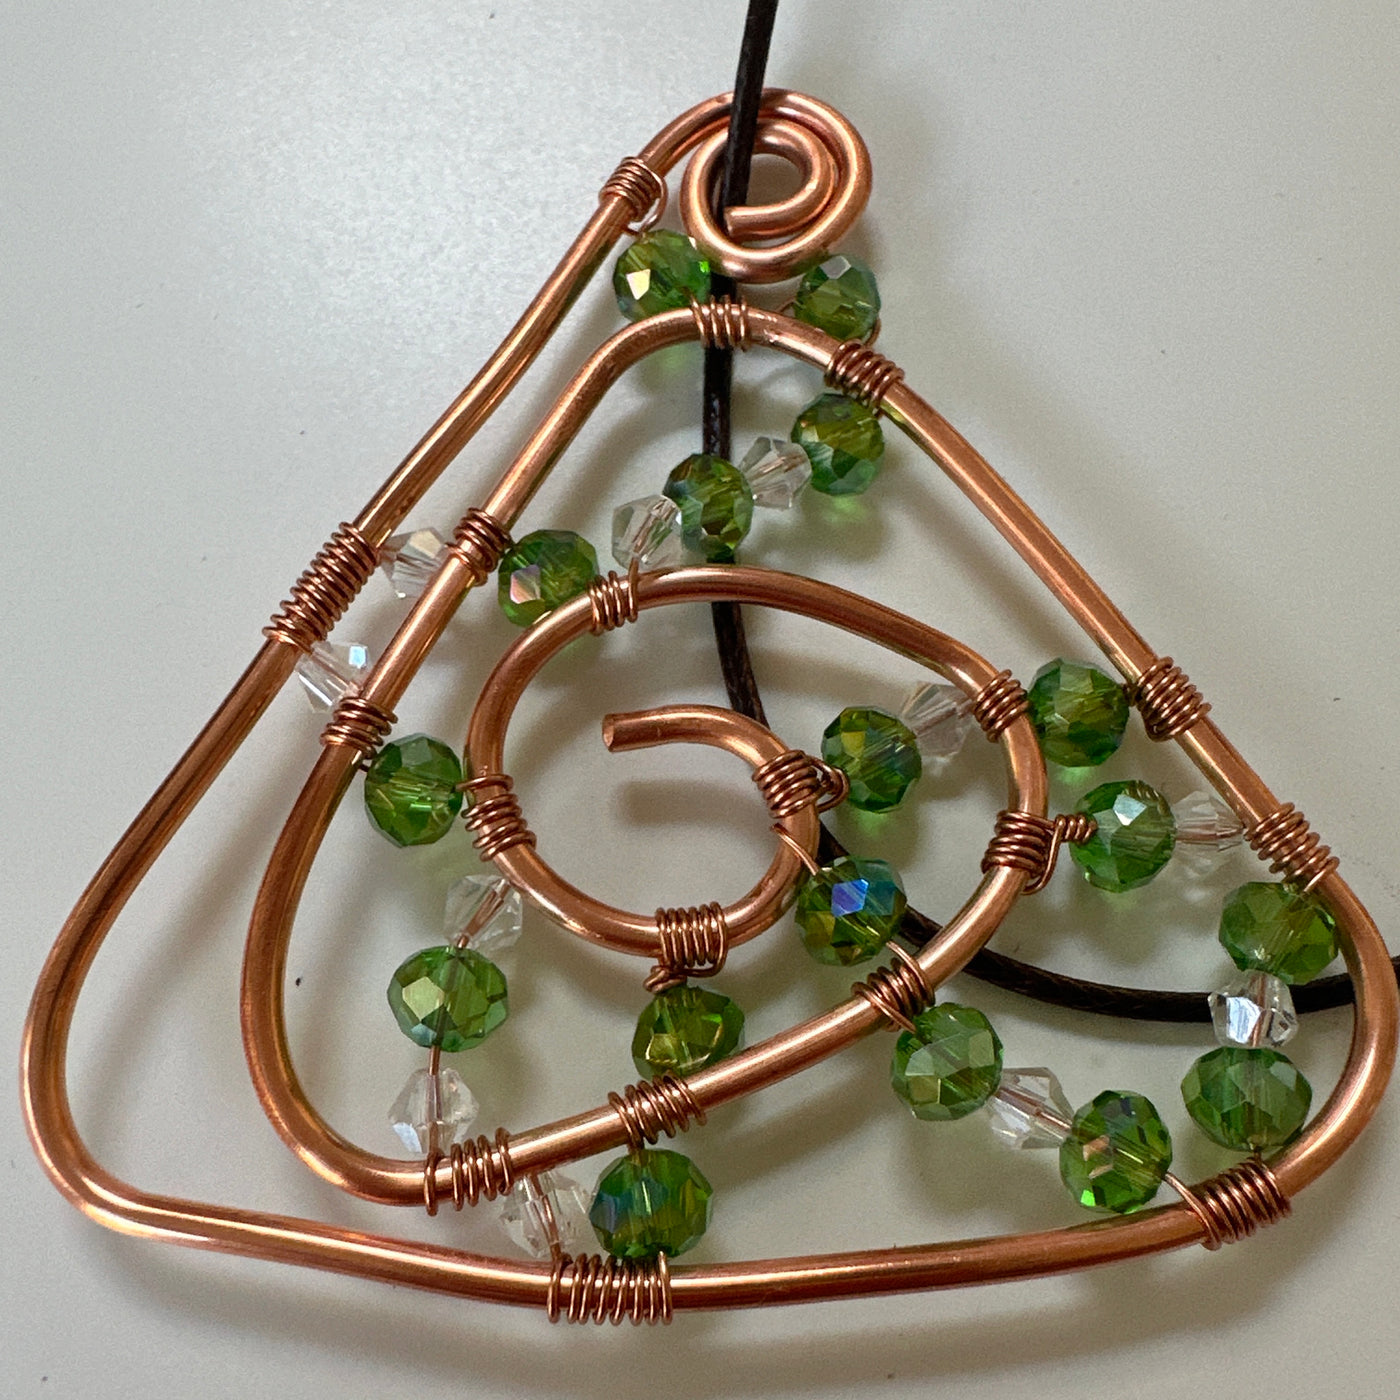 Copper abstract triangle design with green and white chrystals. Leather cord